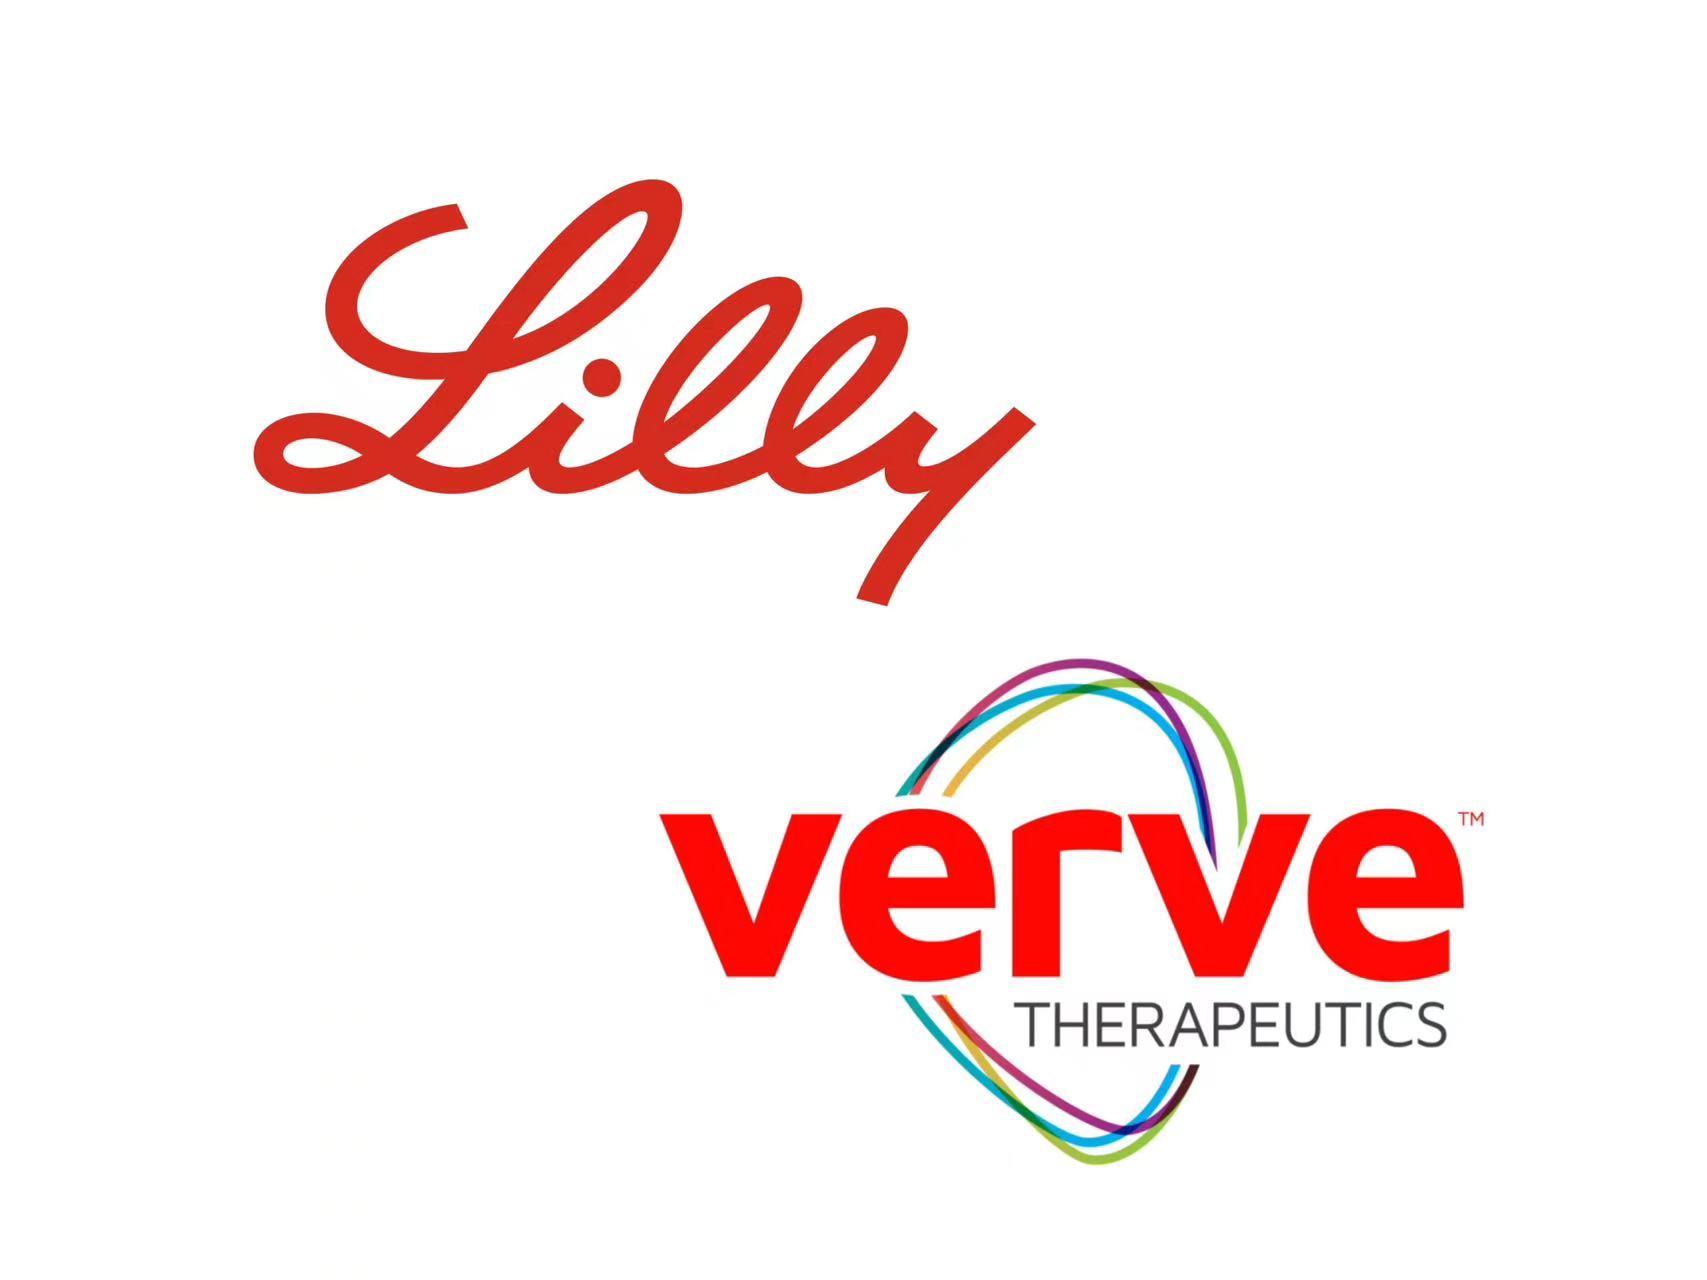 Eli Lilly, Verve Therapeutics to Collaborate on Gene-Editing Therapy for ASCVD